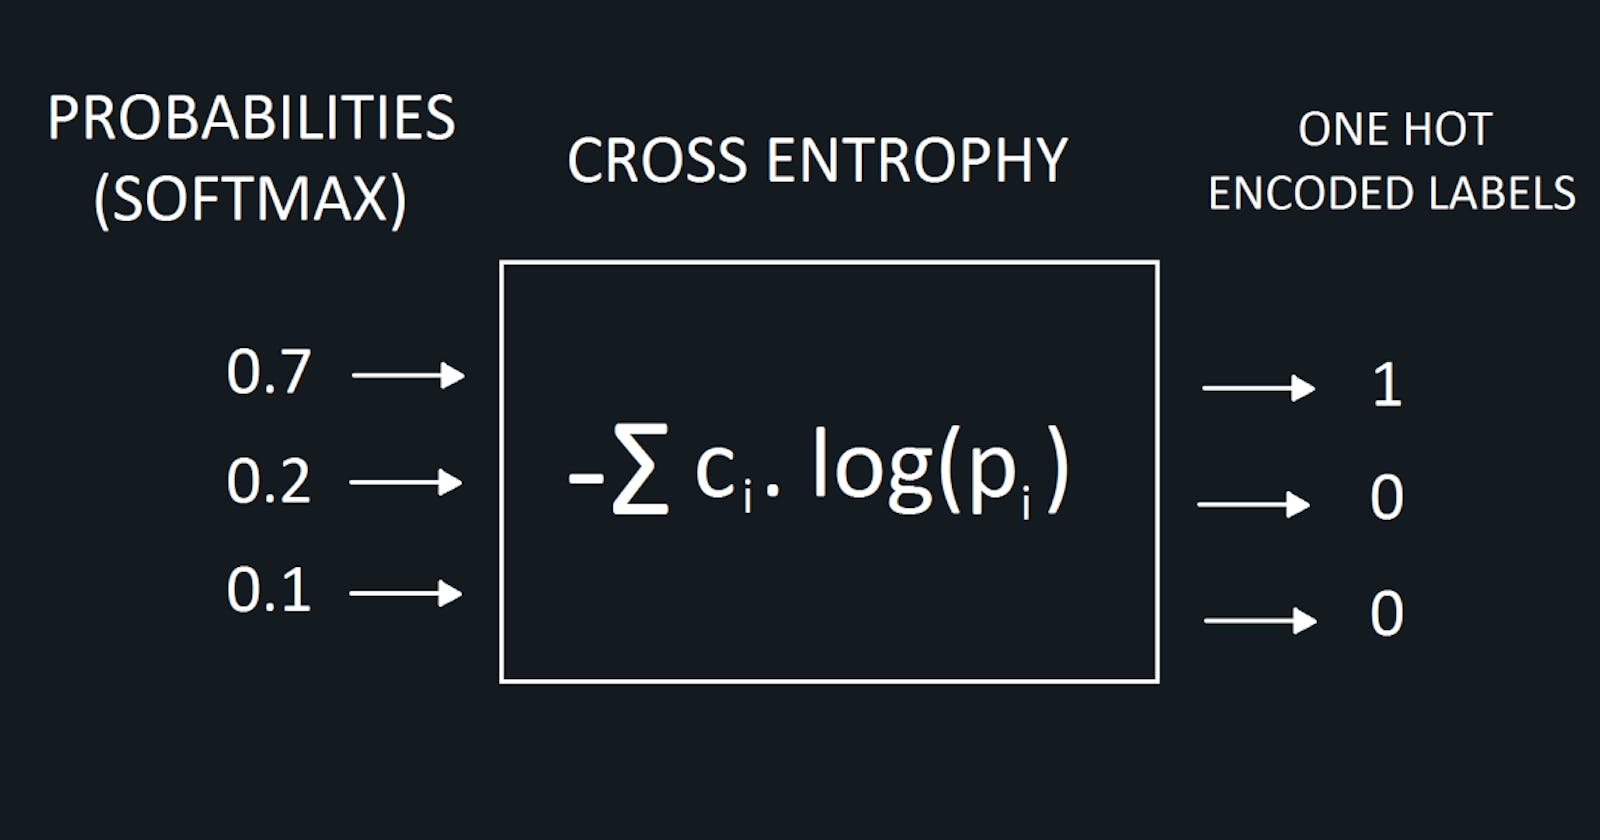 Let's learn about Cross Entropy